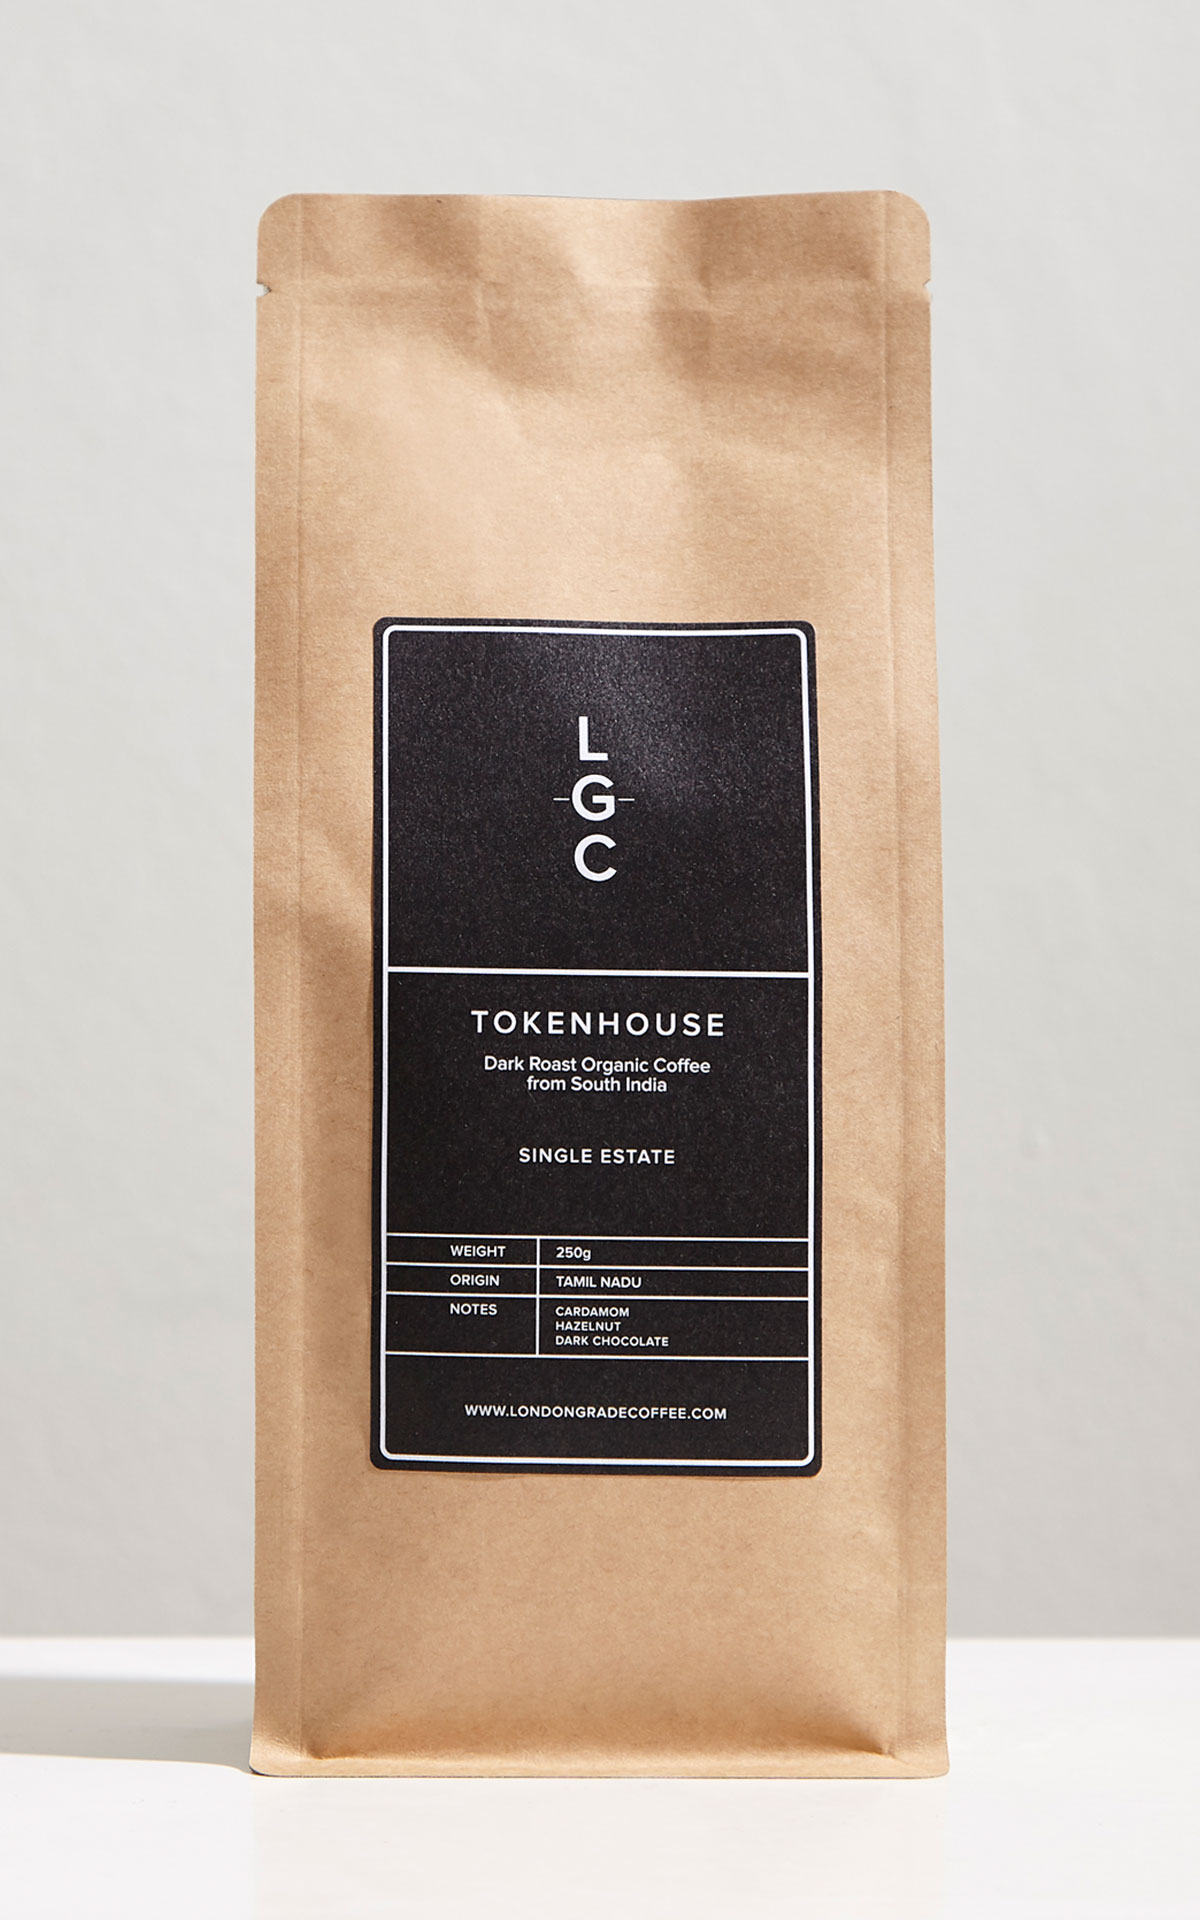 London Grade Coffee Tokenhouse coffee 250g from Bicester Village